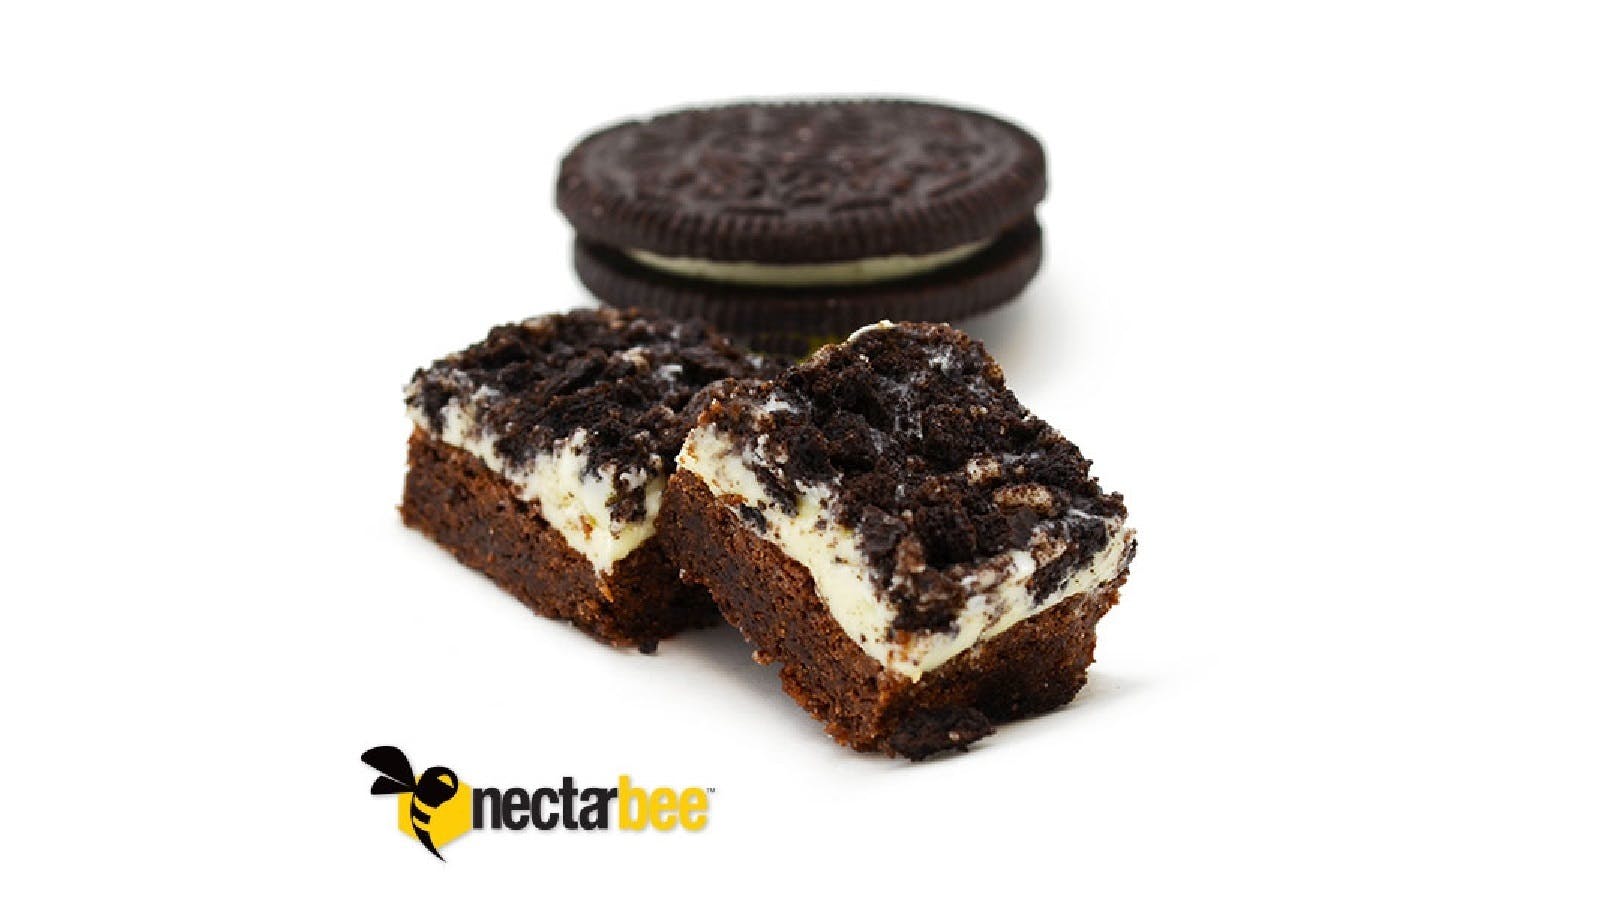 edible-nectarbee-cookies-and-cream-40mg